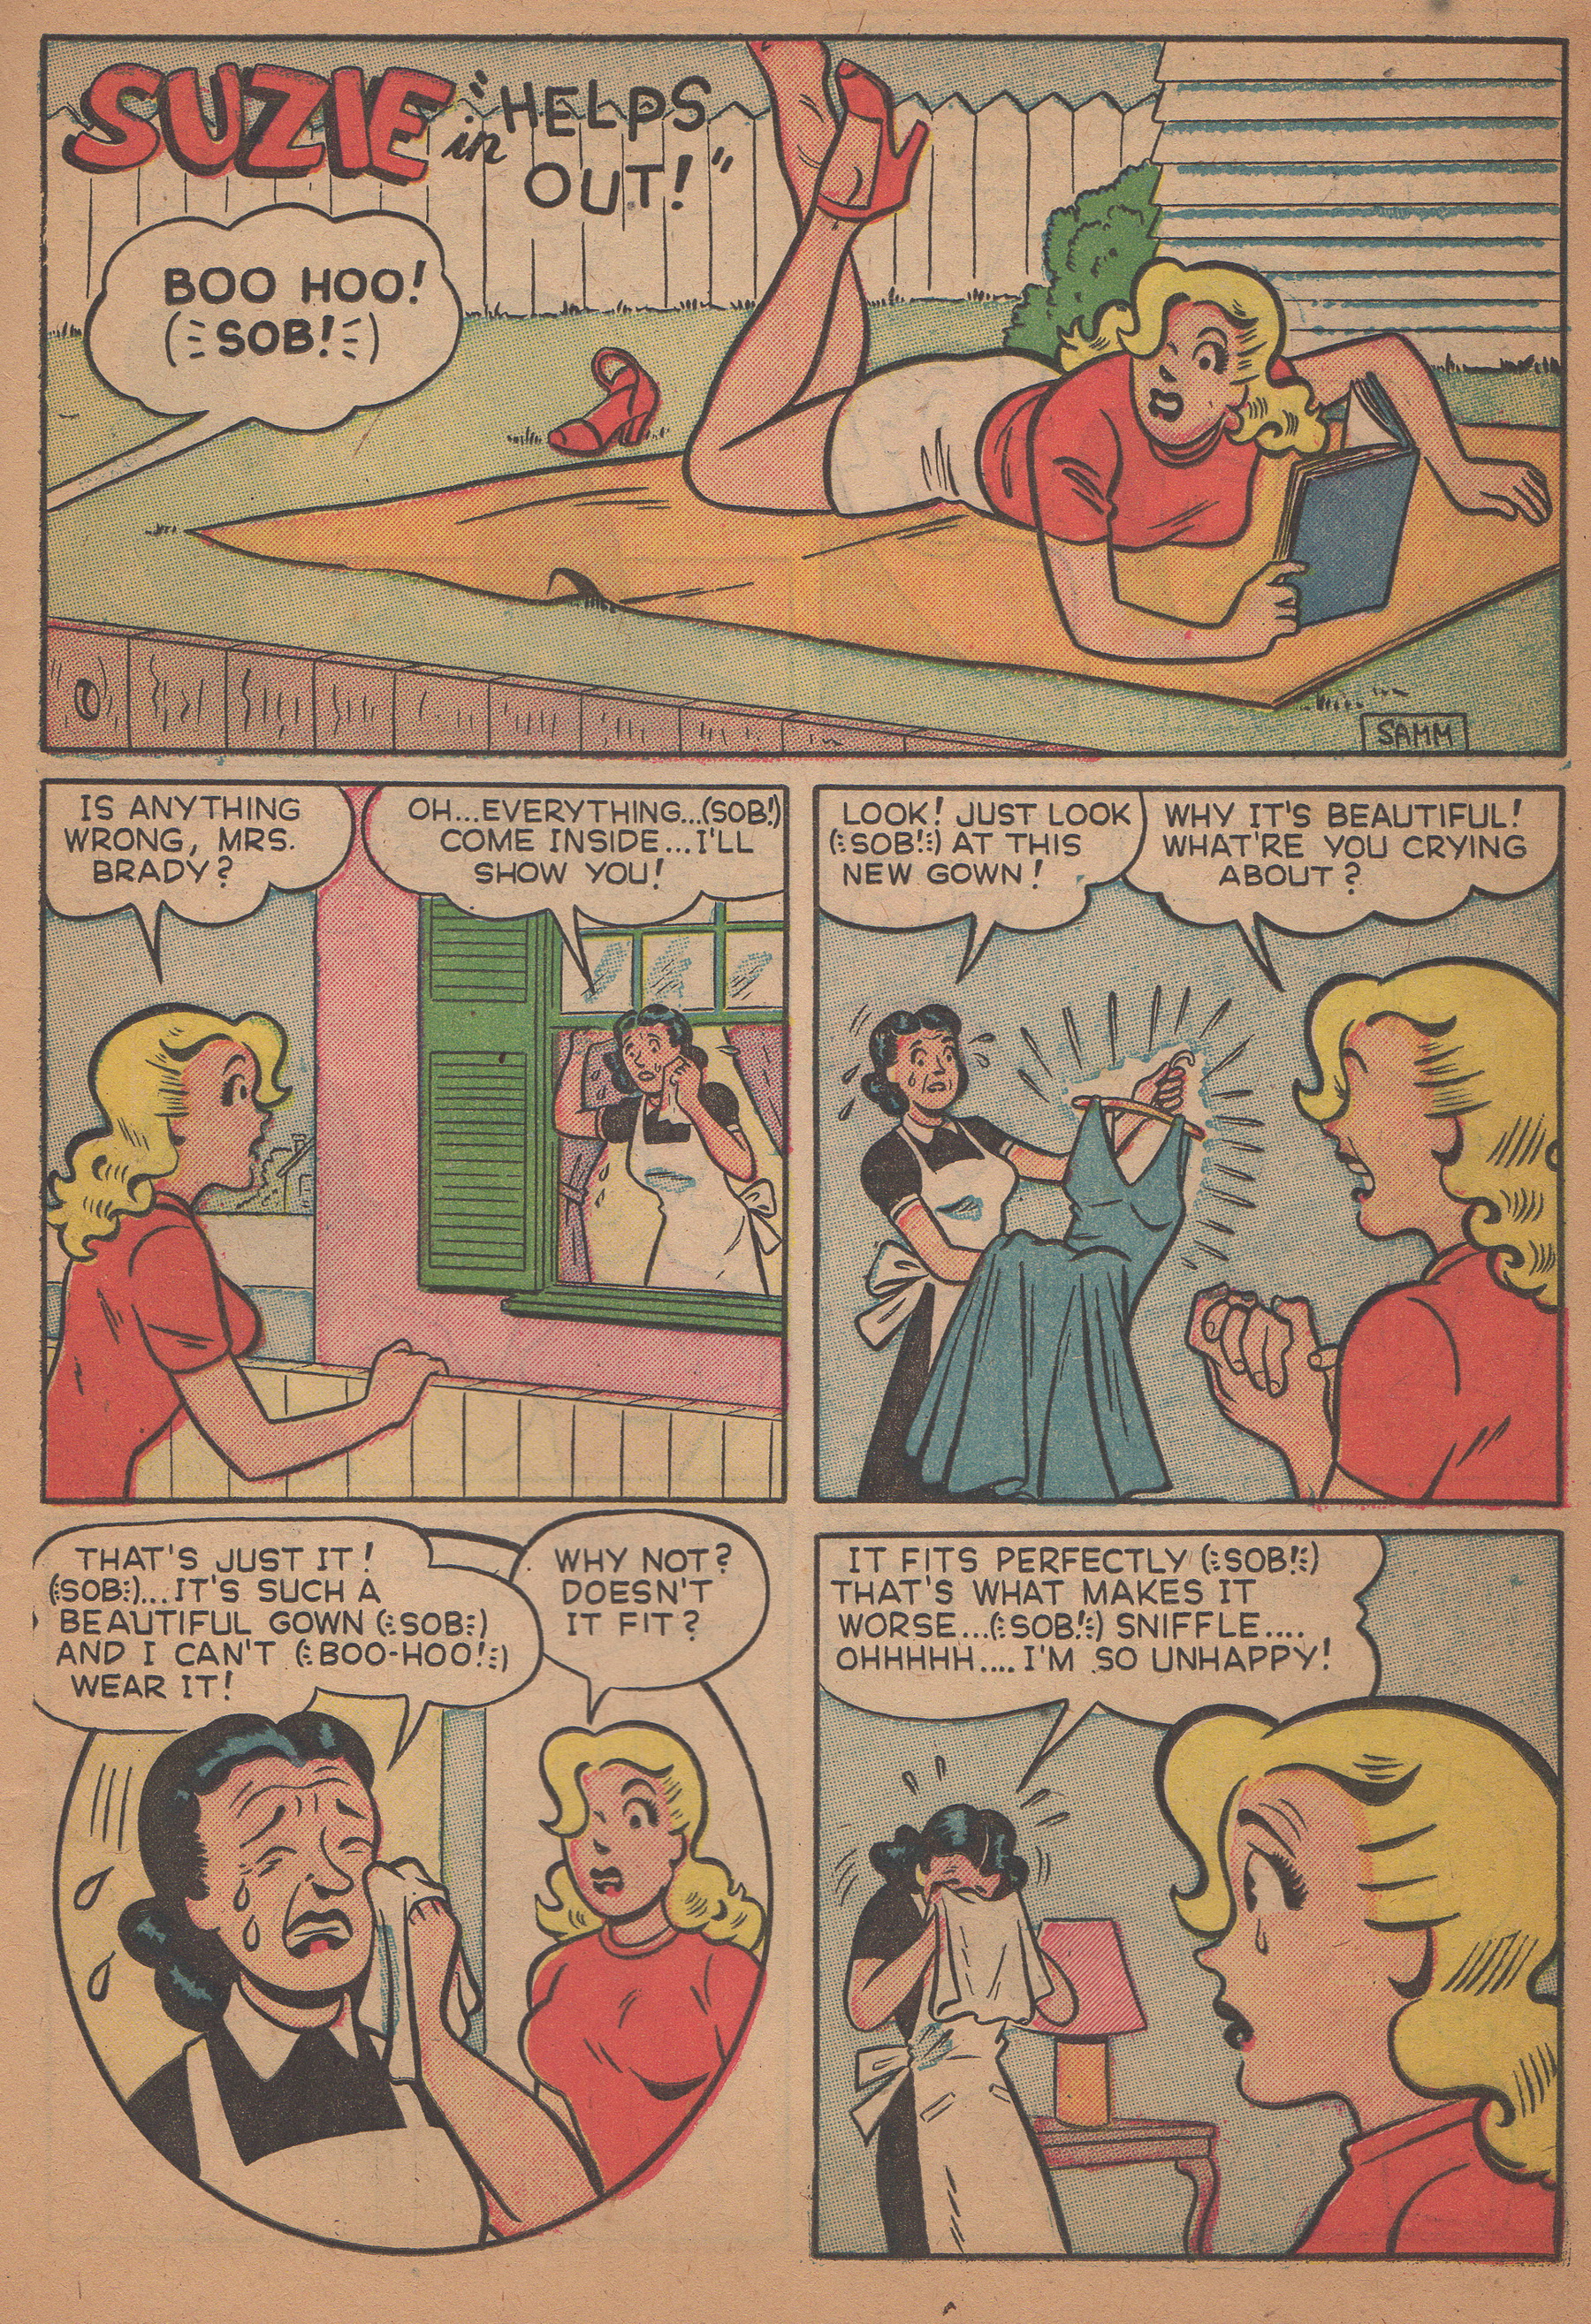 suzie story page 1 from Jughead #8